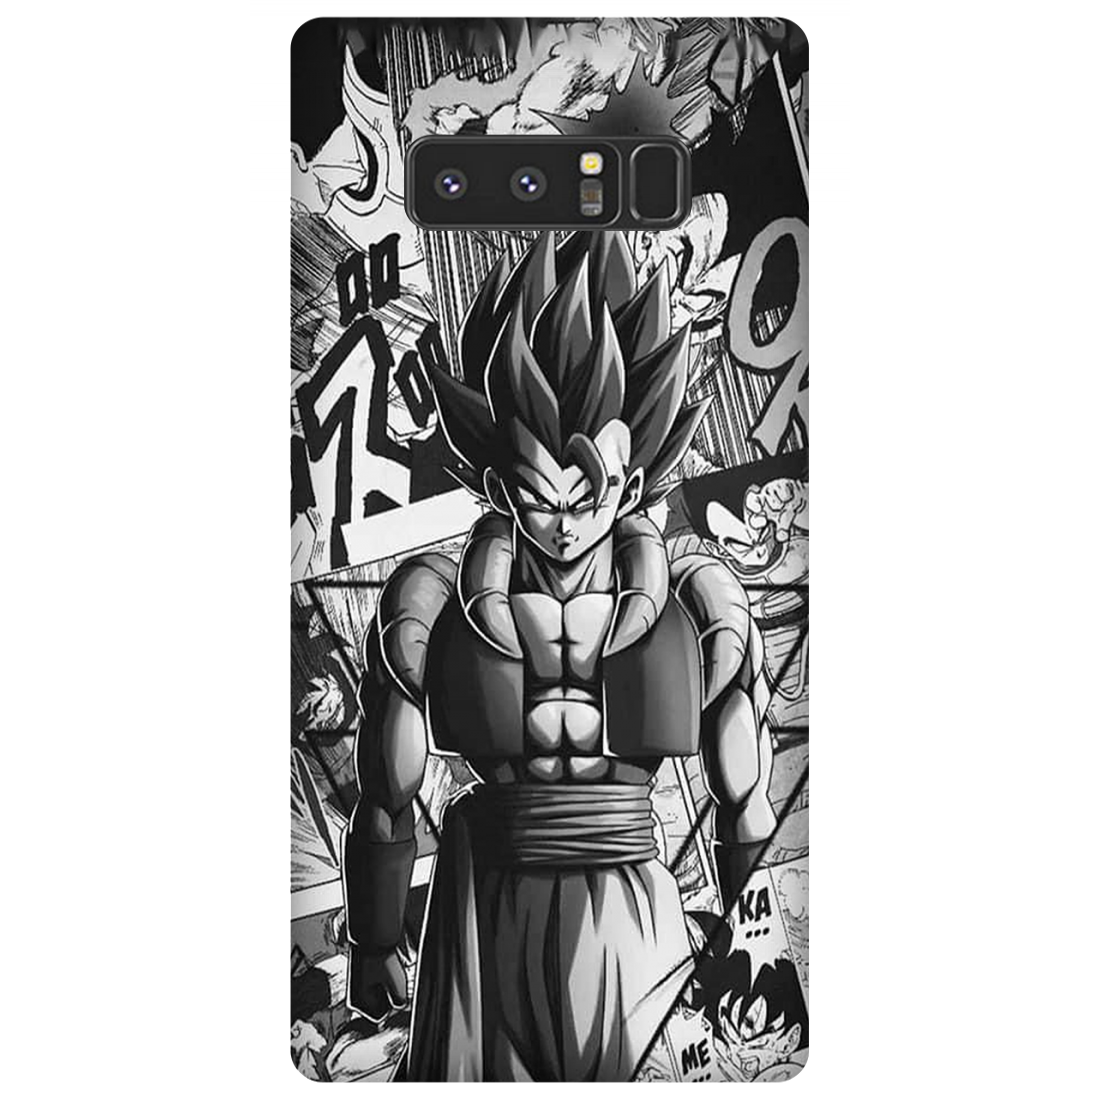 The Ultimate Fighter Case Samsung Galaxy Note 8